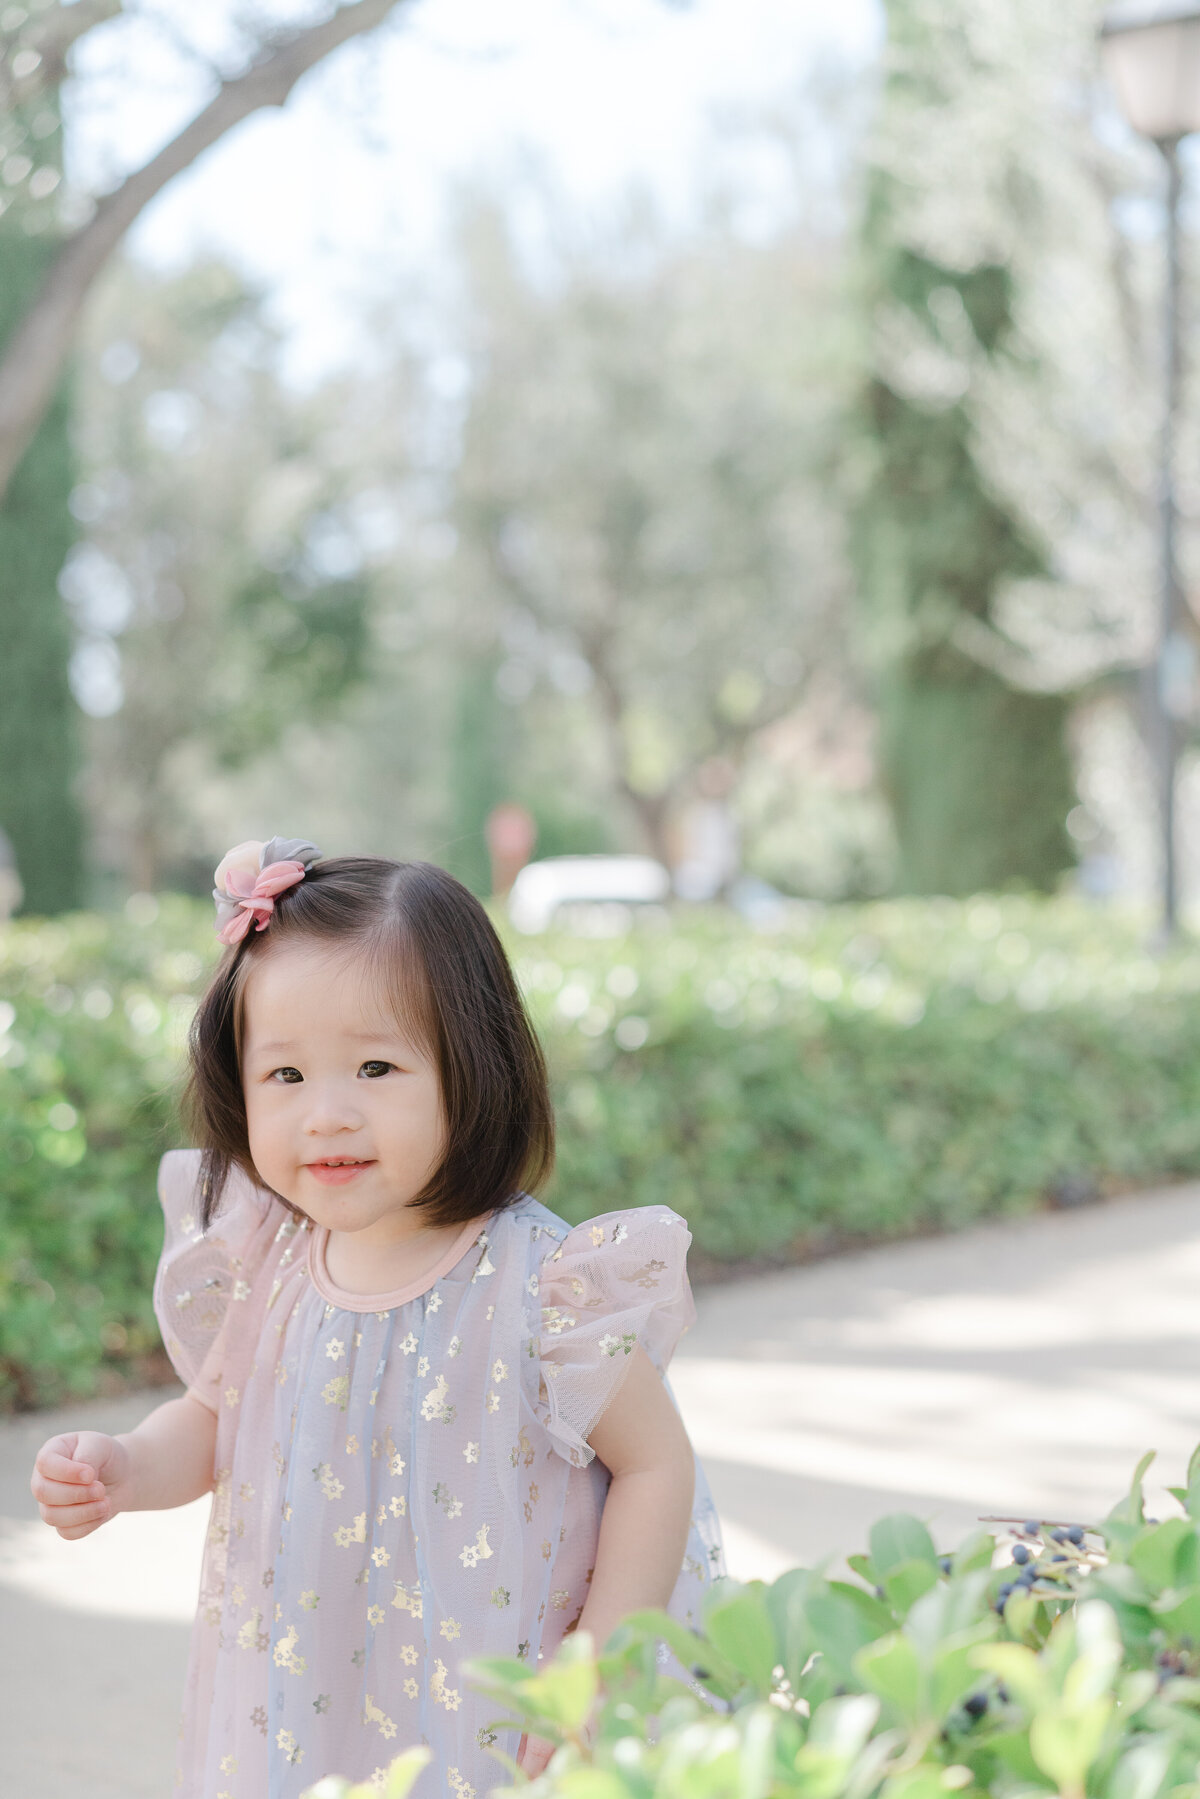 little girl with bow and pink dress walking in park